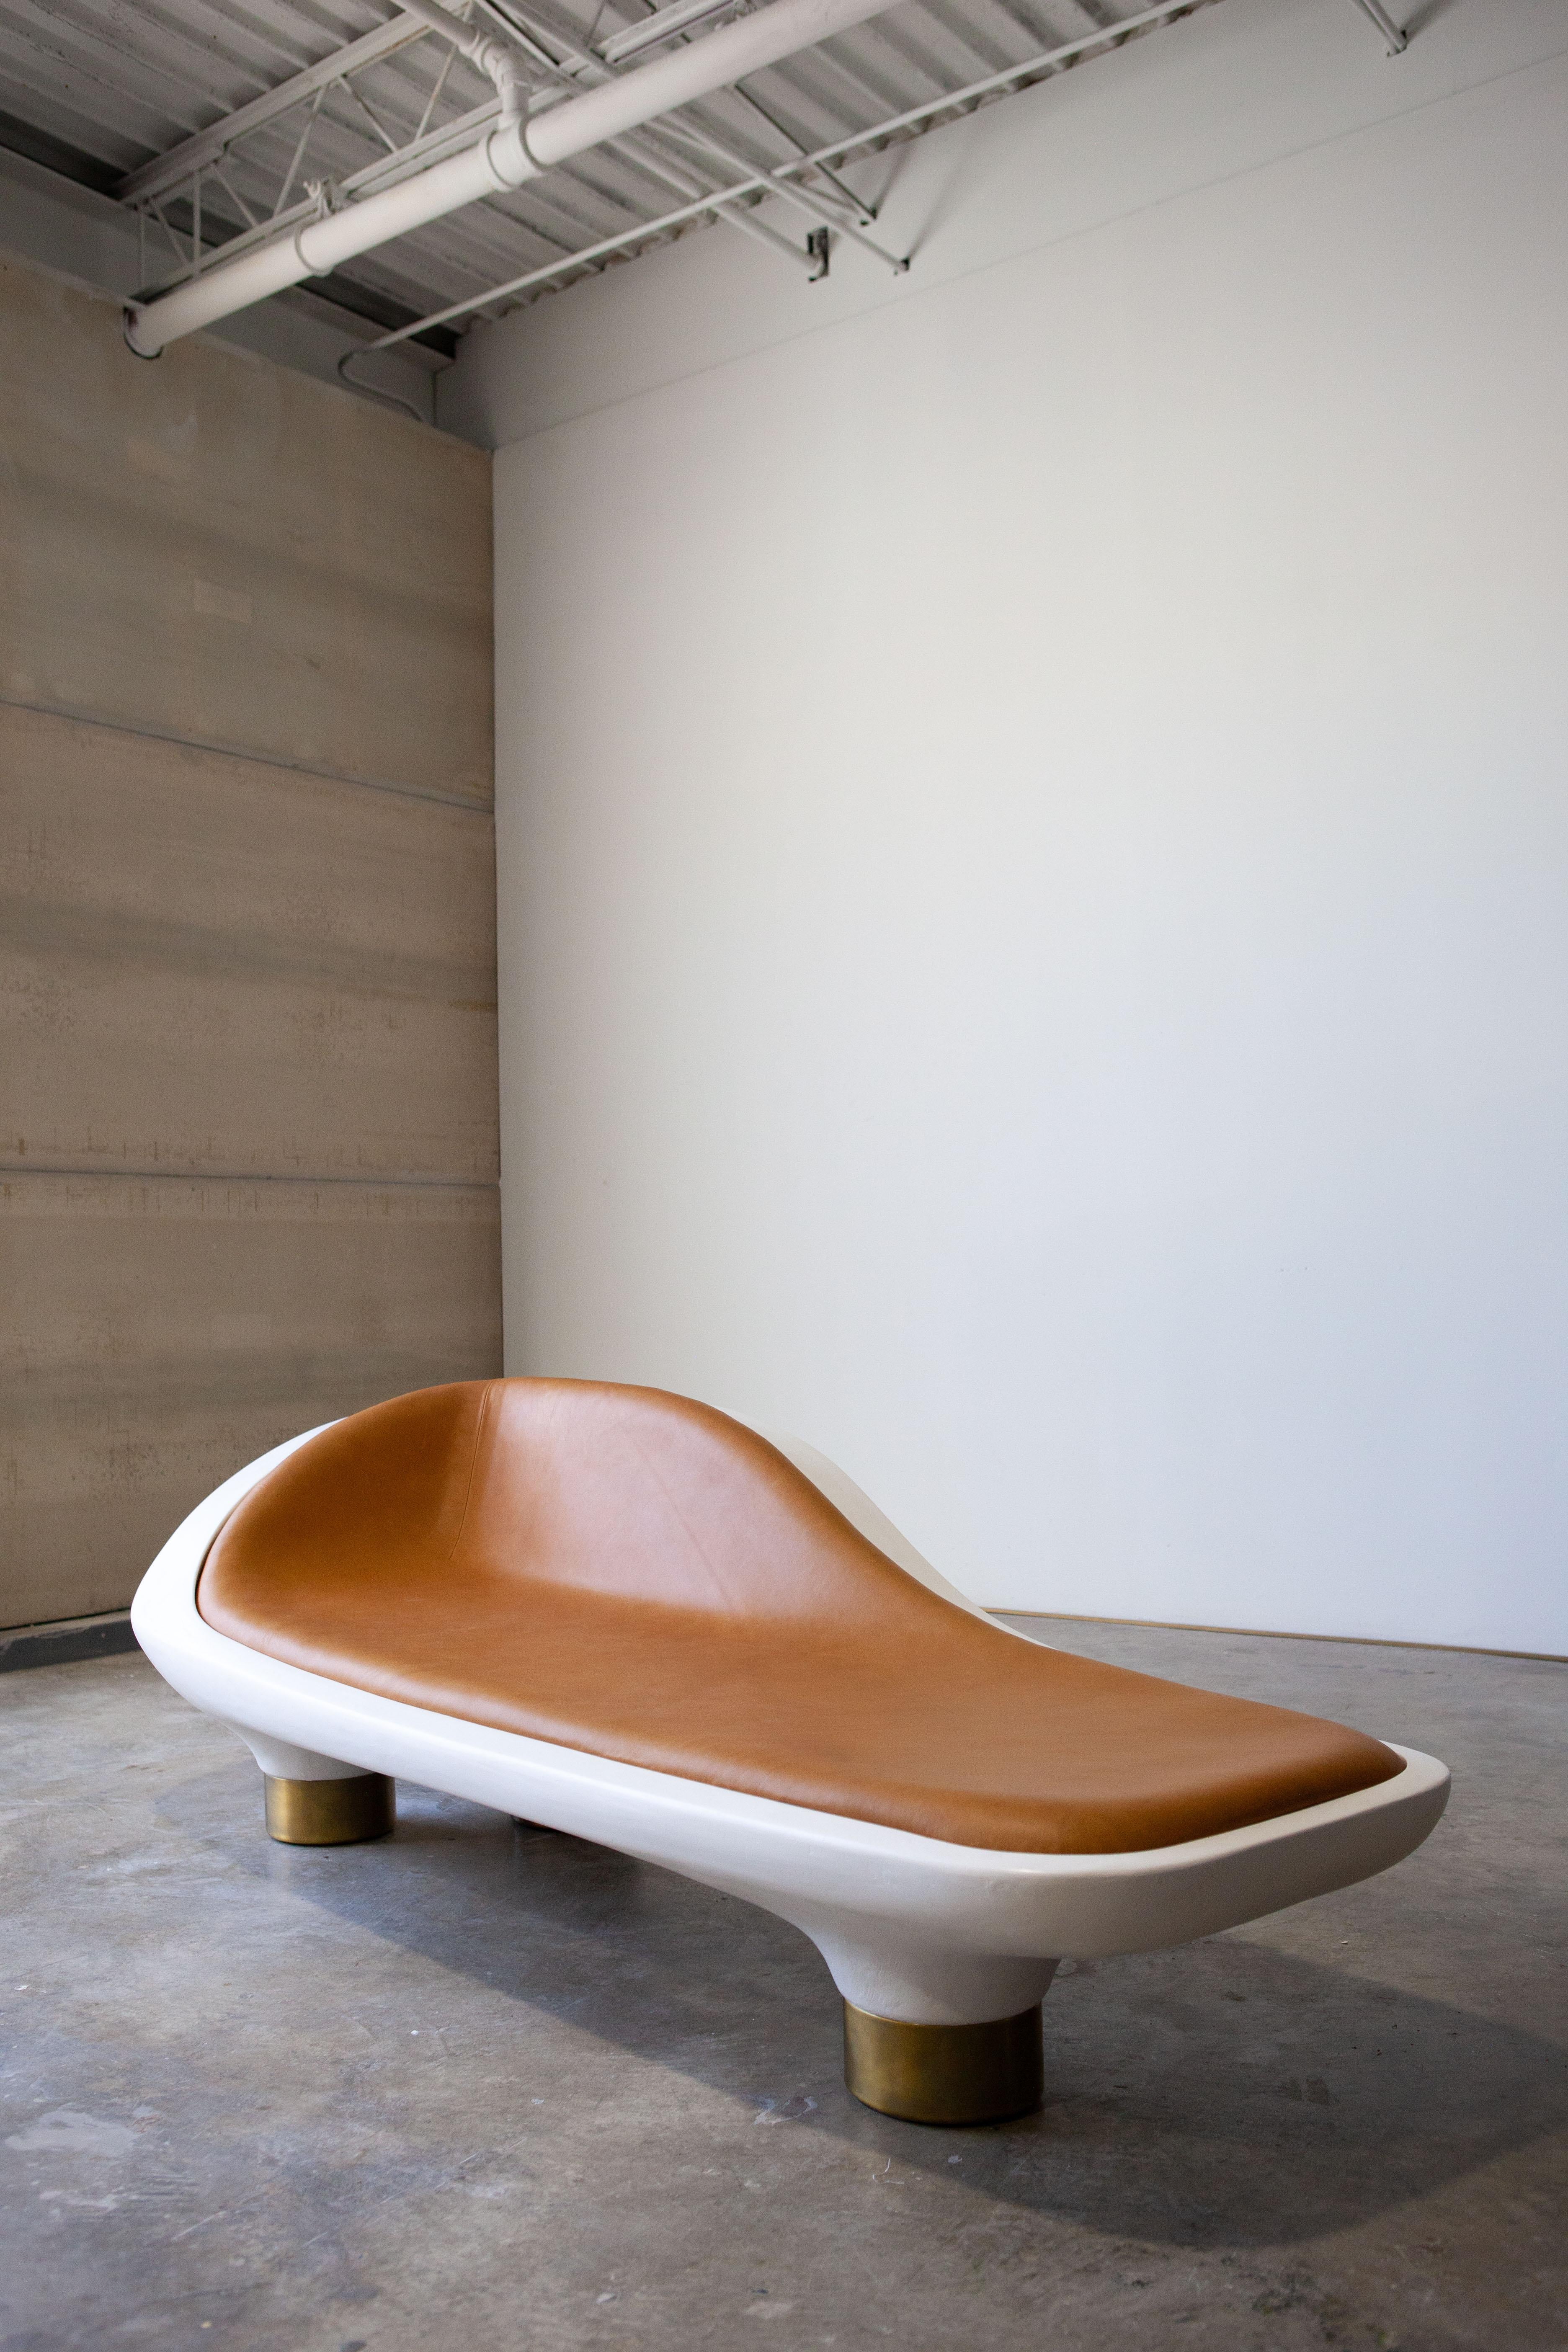 American Acuestate, Y No Jodas Mas, Chaise Longue by Reynold Rodriguez For Sale